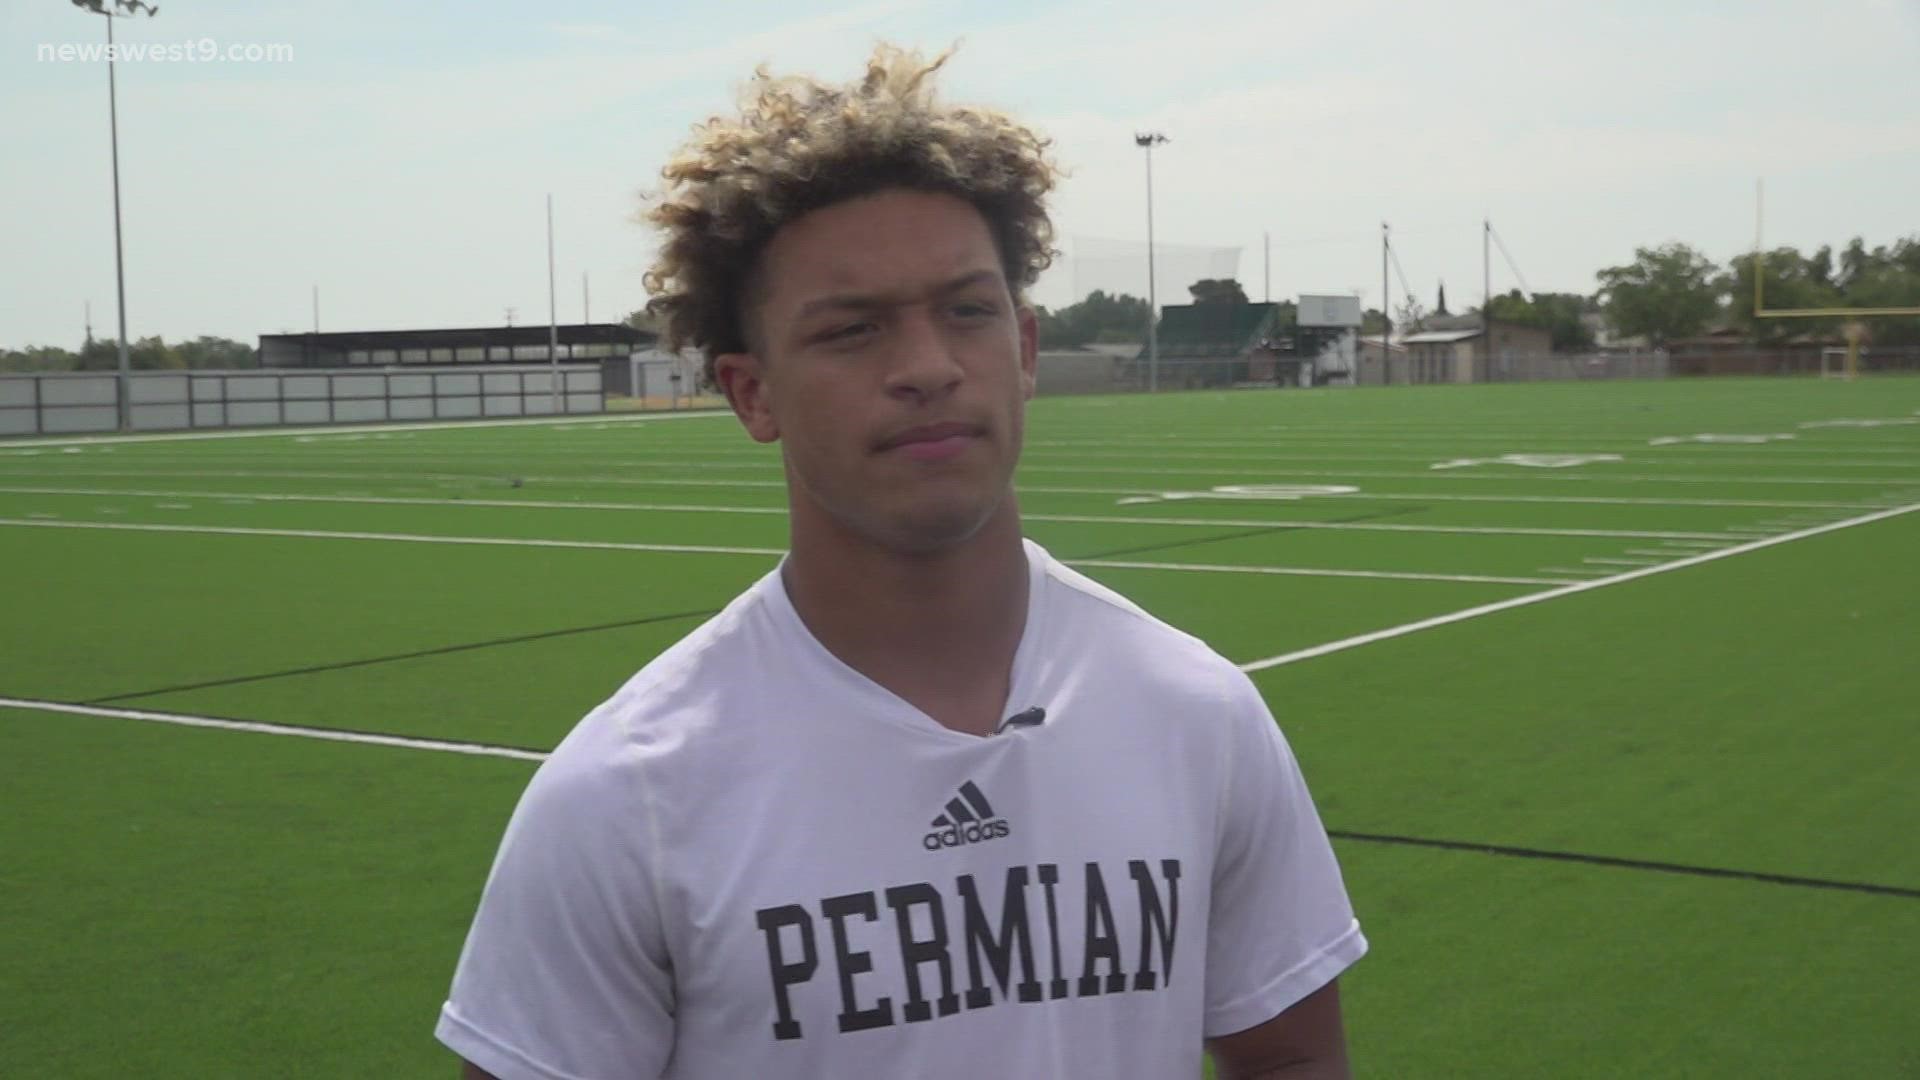 Permian High Quarterback Rodney hall scored six touchdowns in last week's victory over Waco Midway. The junior has his eyes set on a state championship.